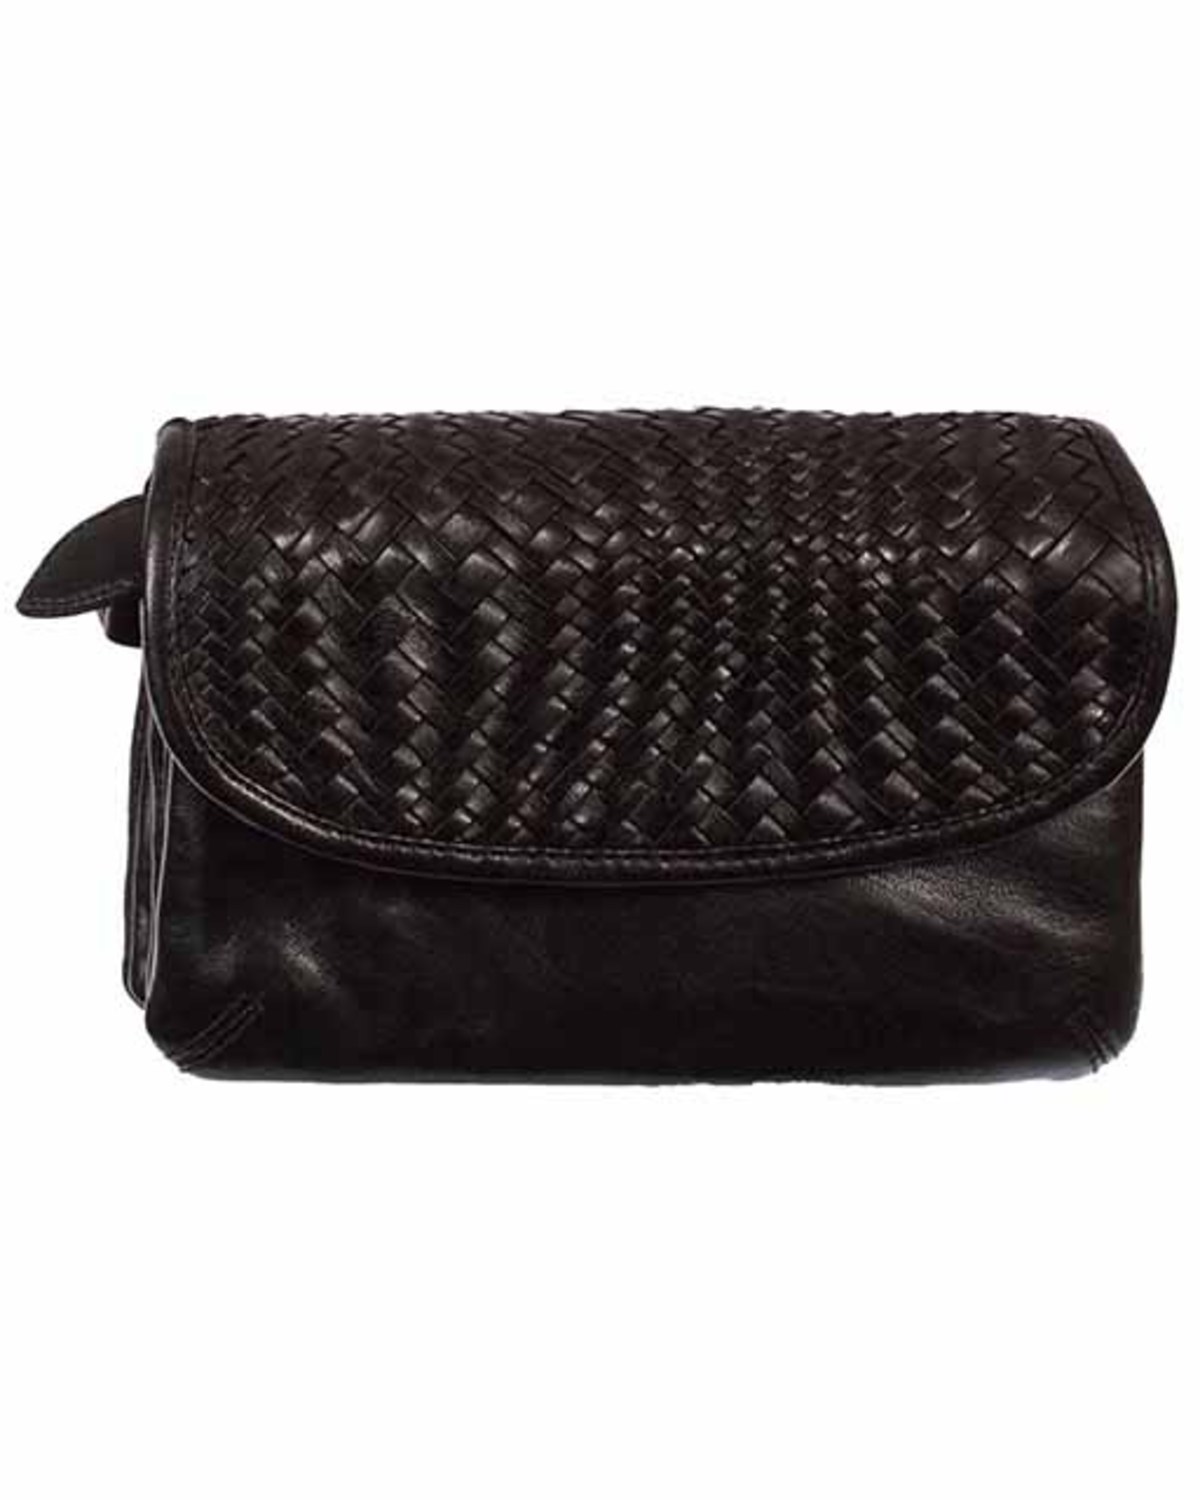 Scully Women's Woven Leather Handbag